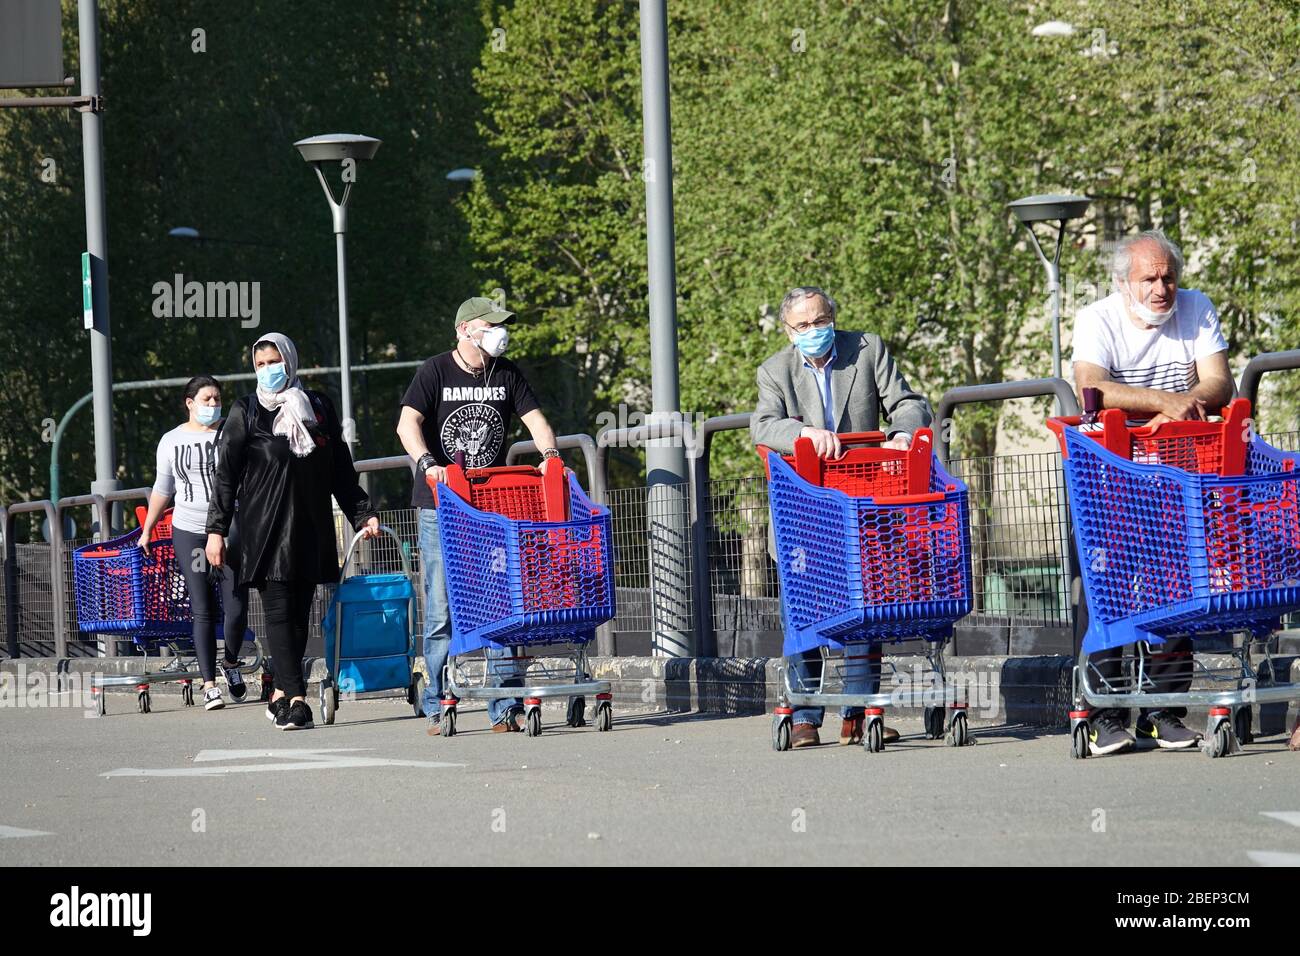 Coronavirus pandemic effects: long queue to enter the supermarket for  shopping. Milan, Italy - April 2020 Stock Photo